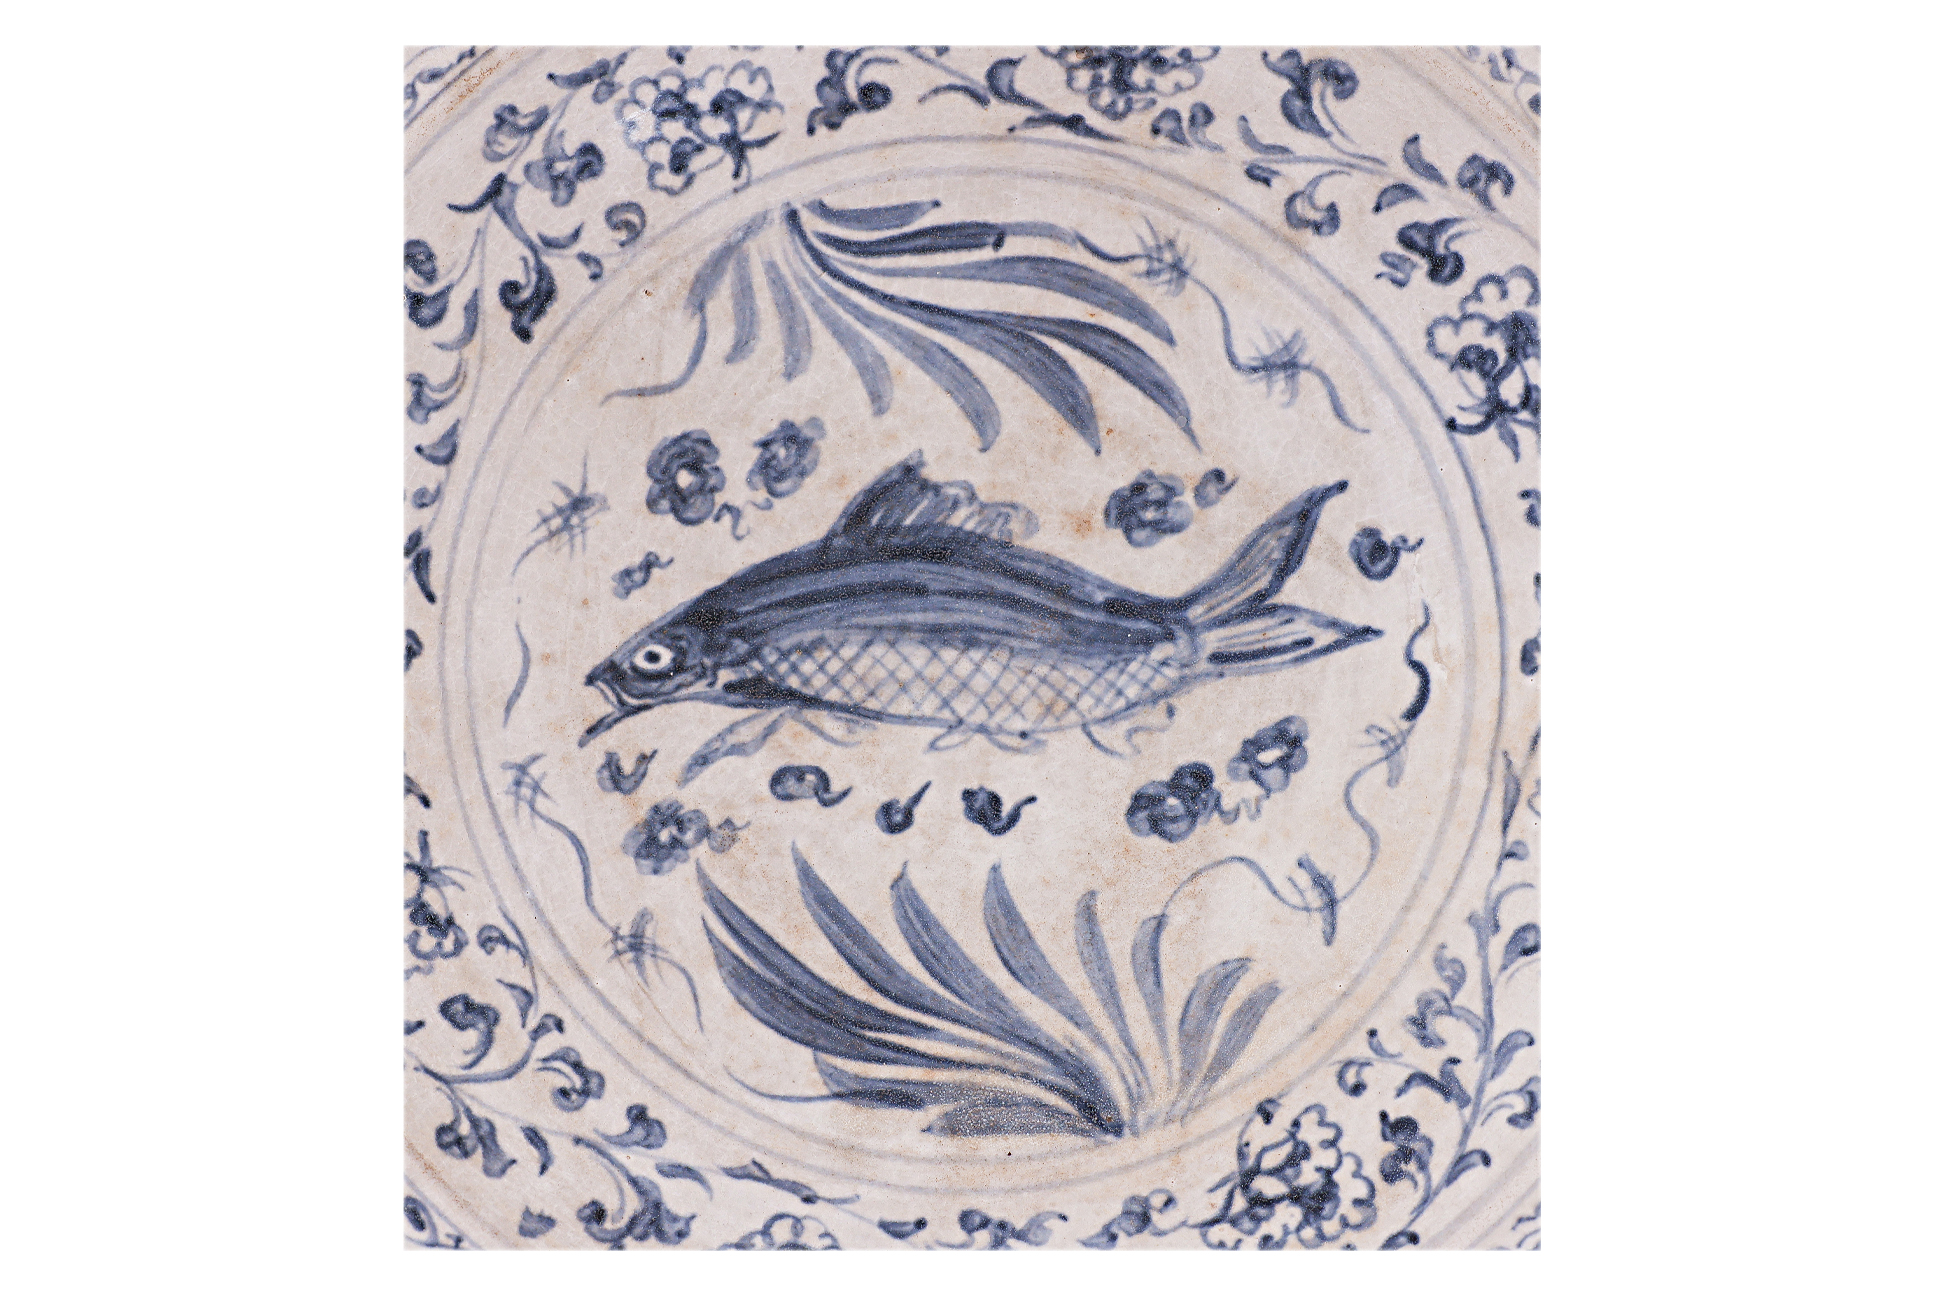 A LARGE VIETNAMESE BLUE AND WHITE CARP DISH - Image 2 of 7